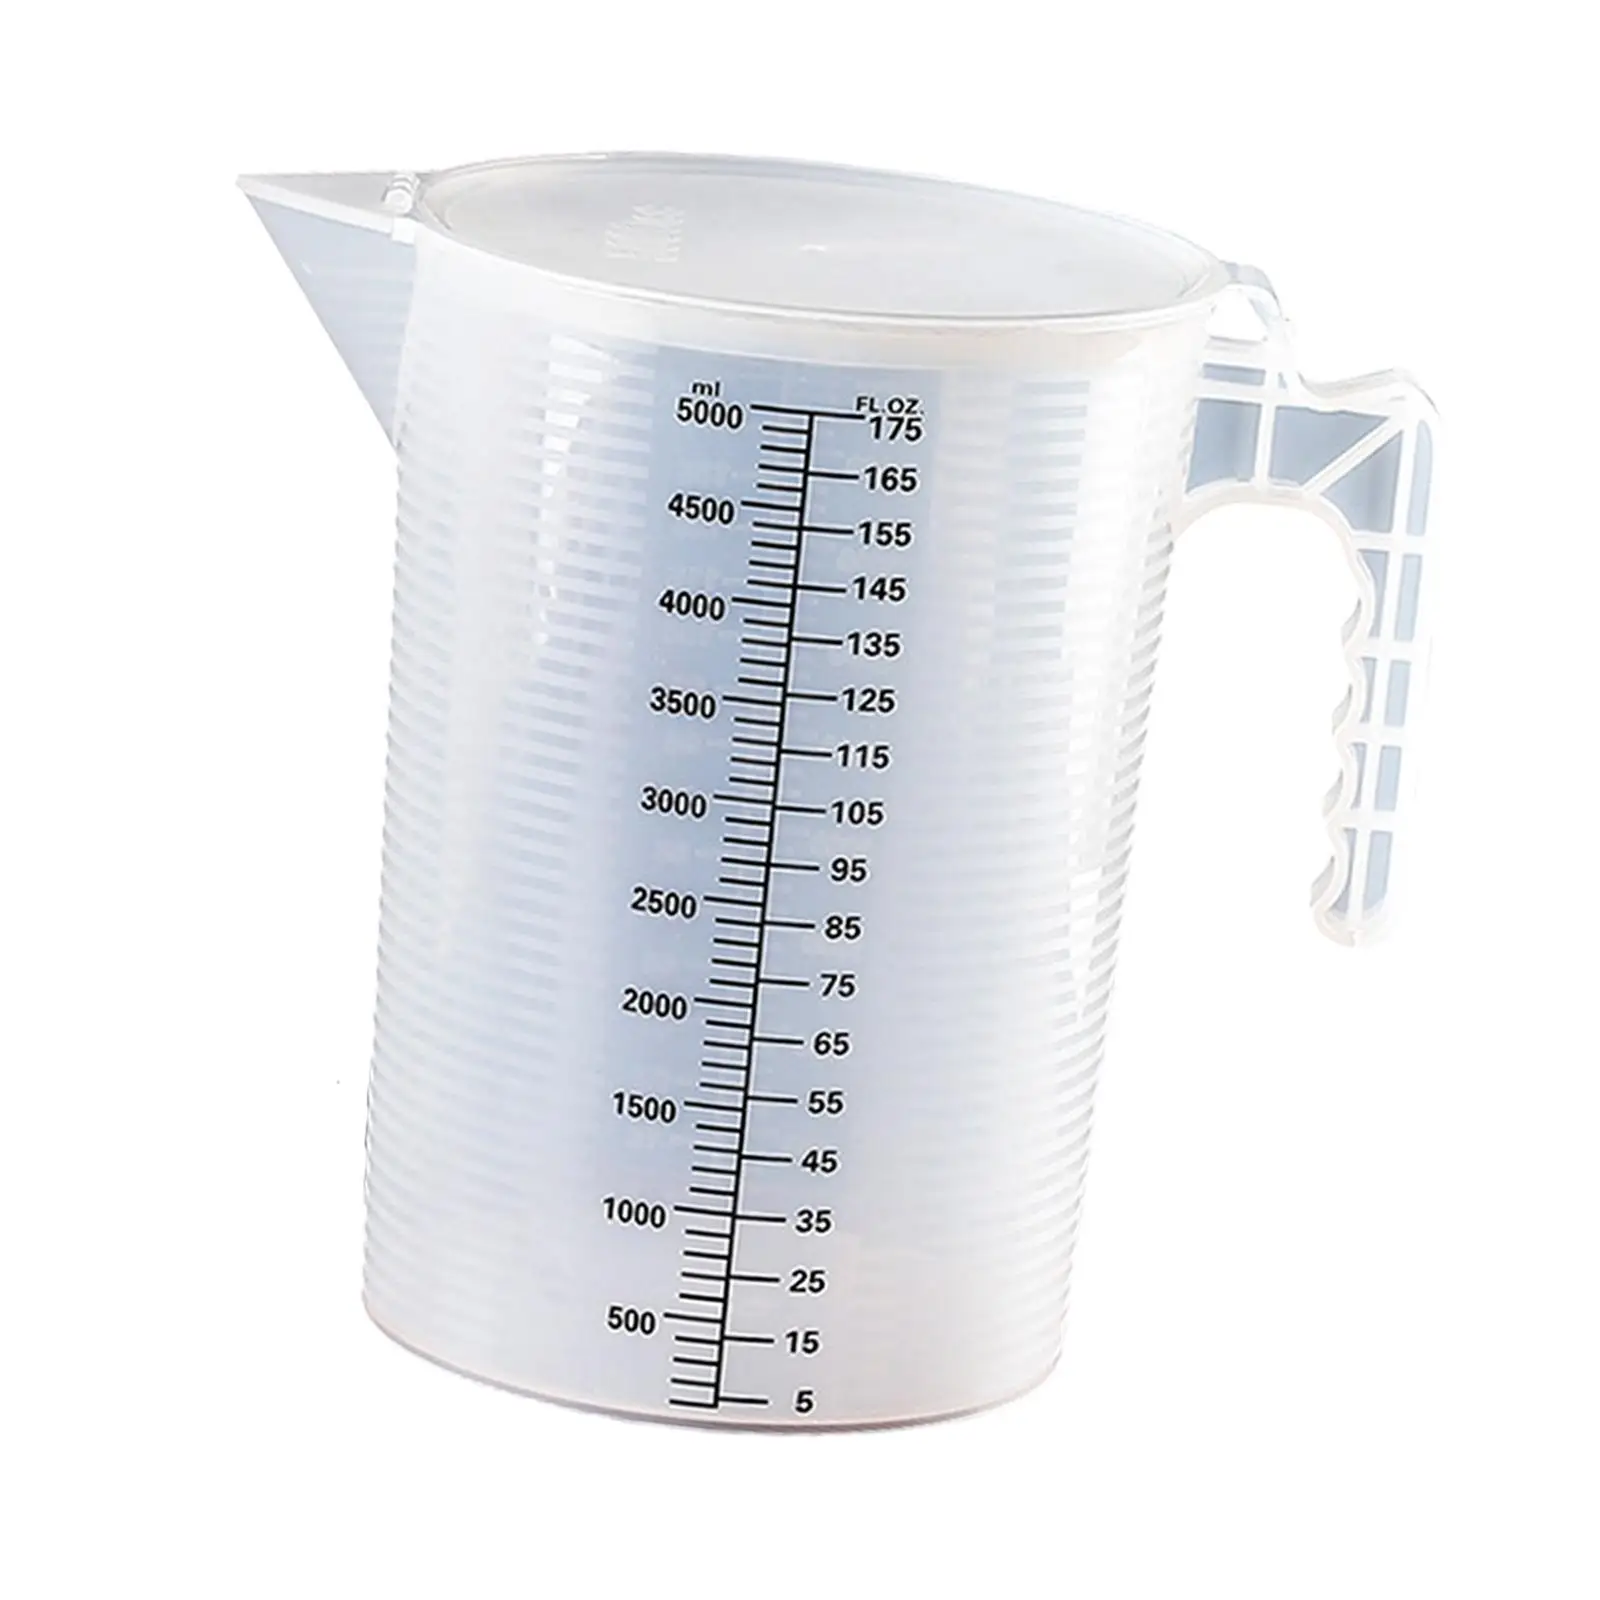 Plastic Water Pitcher 5000ml Clear Measuring Cup for Tea Bedside Restaurant